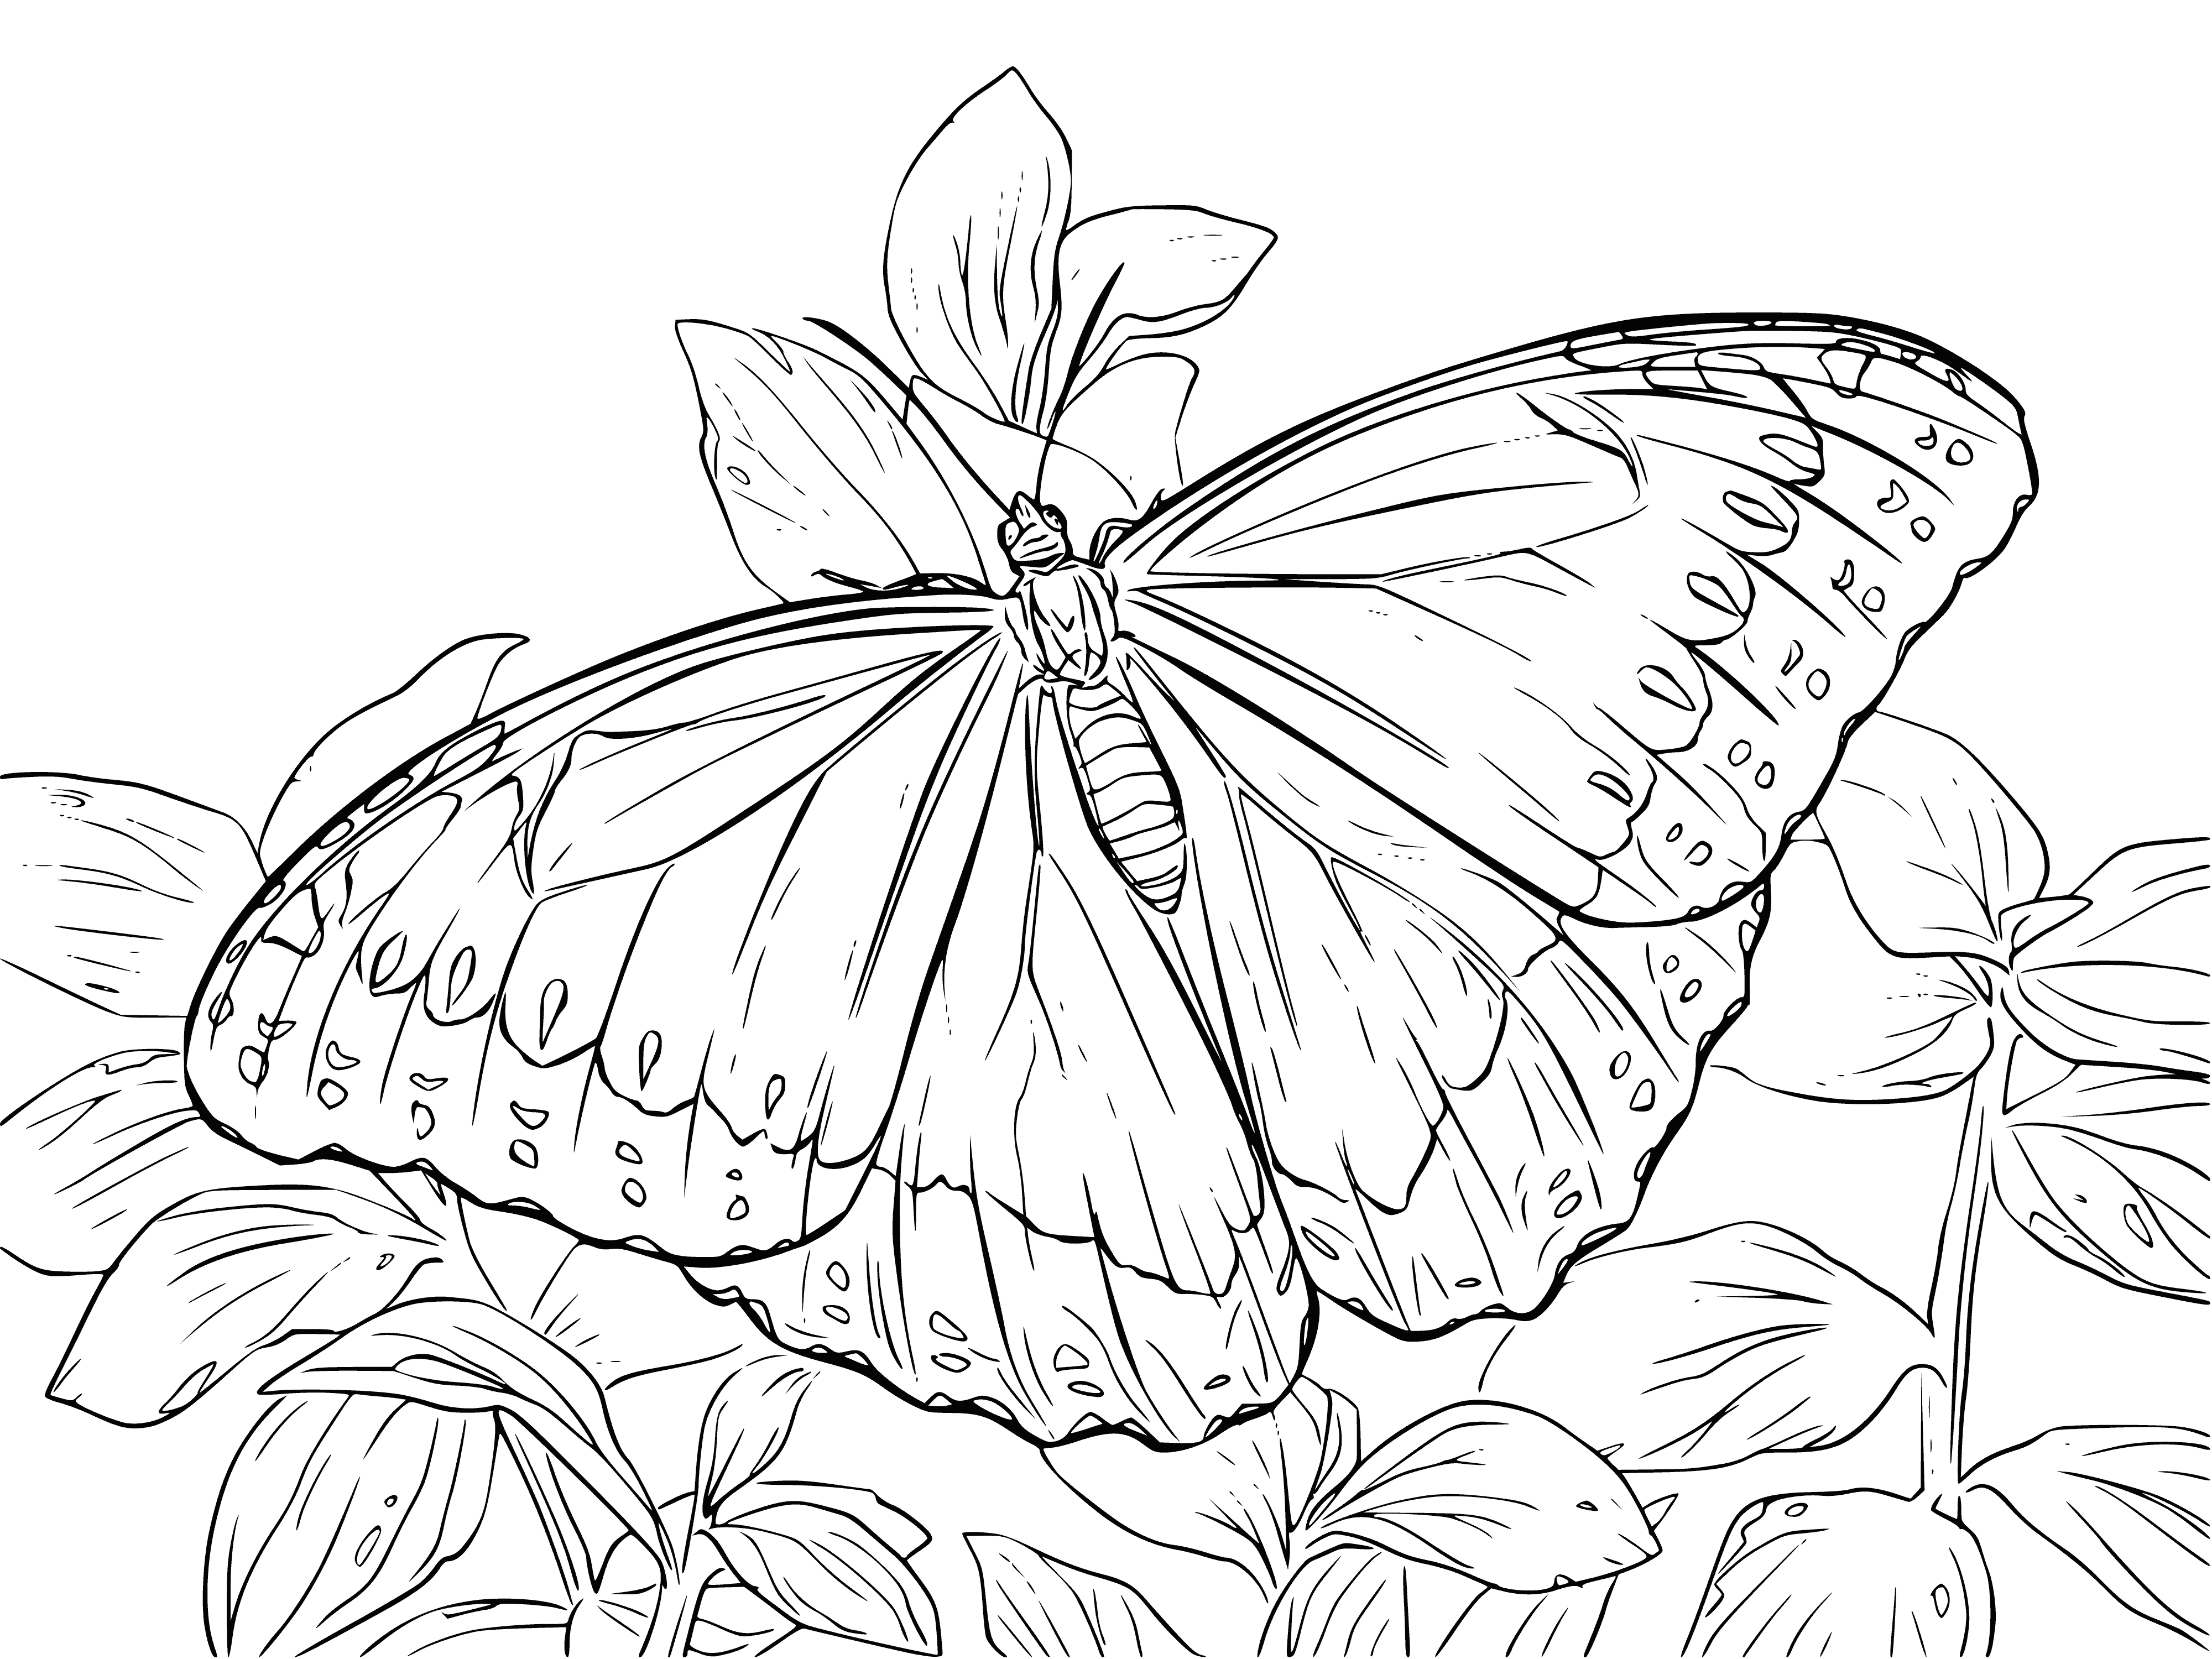 coloring page: Butterflies are flying insects w/slender colorful bodies & two pairs of large wings. They're noted for their beauty & ability to fly.